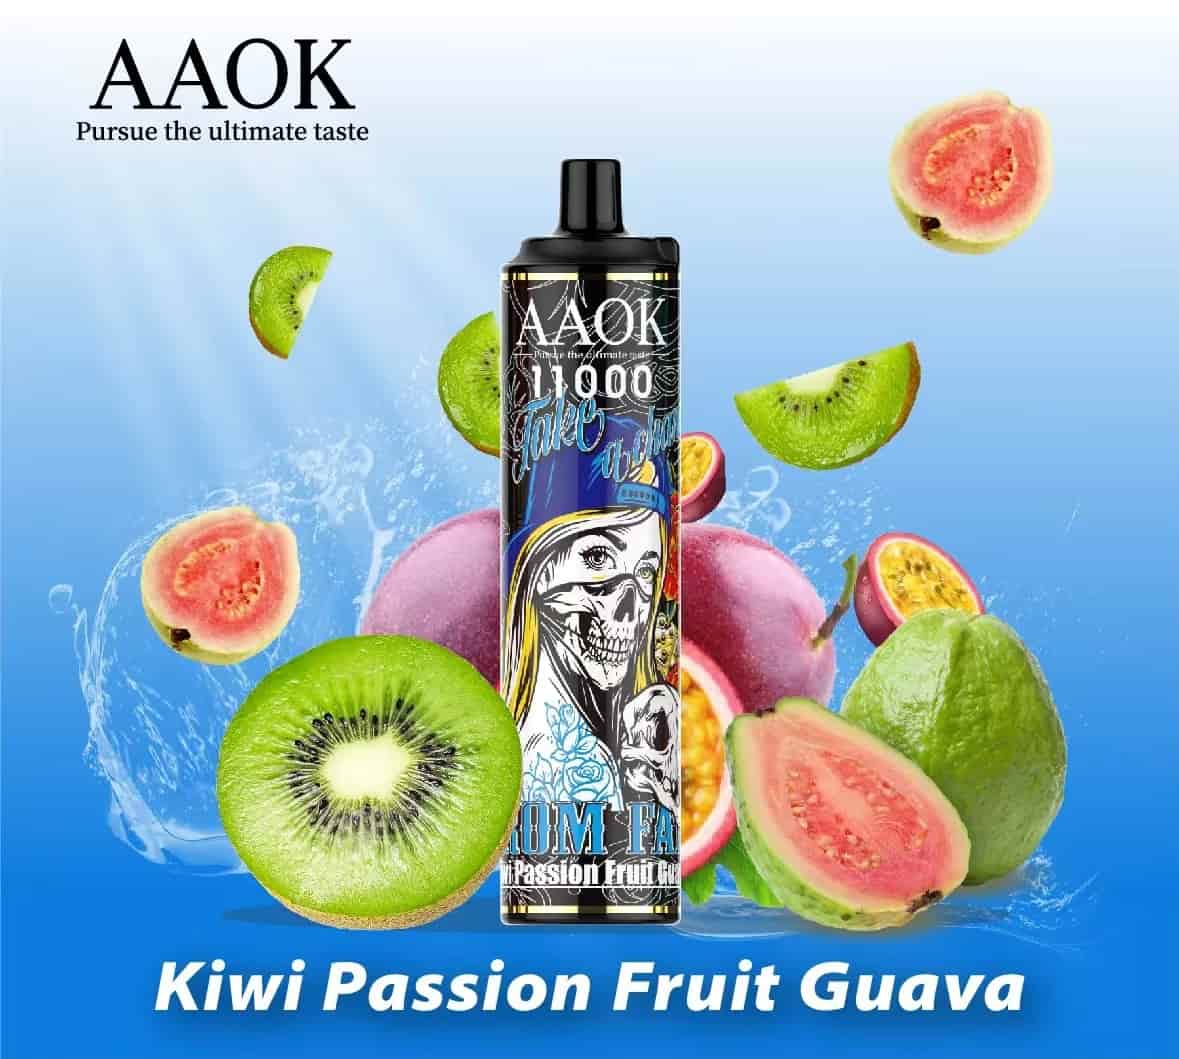 AAOK A83 Kiwi Passion Fruit Guava (11000 Puffs)